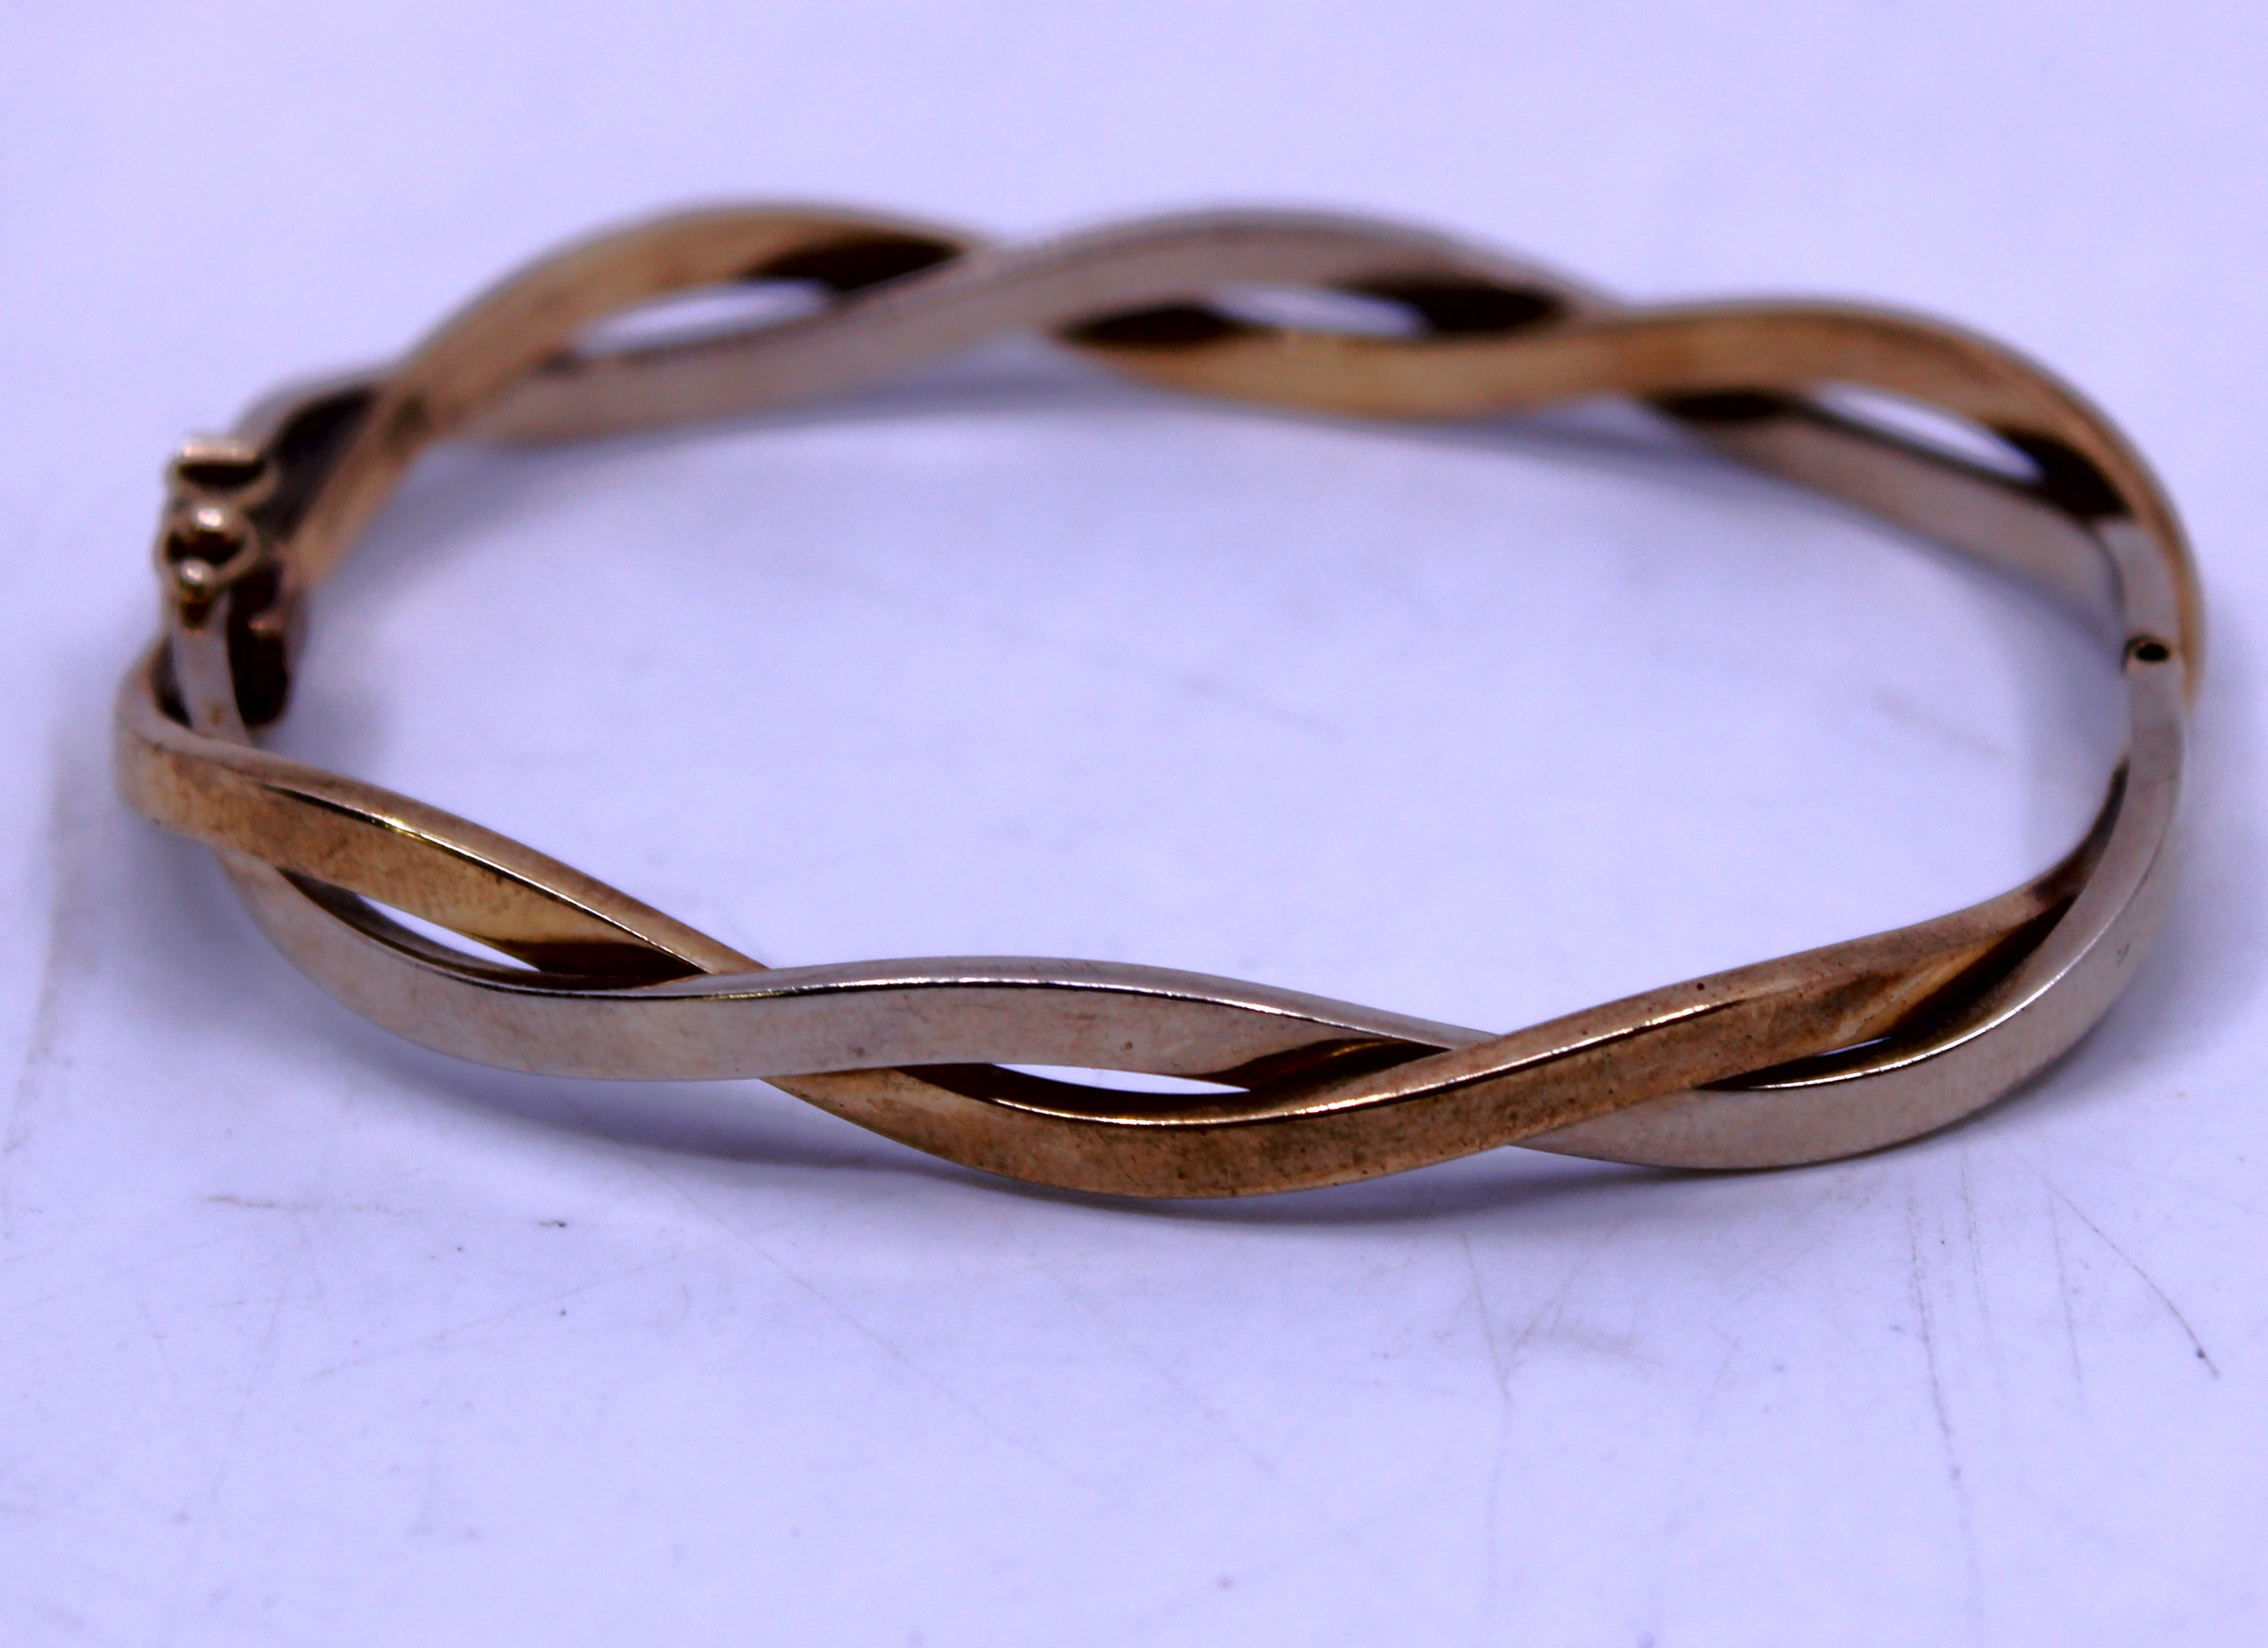 9ct Yellow & White Gold Twist Design Bangle (Hinged).  The Bangle is hallmarked "375" for 9ct Gold.